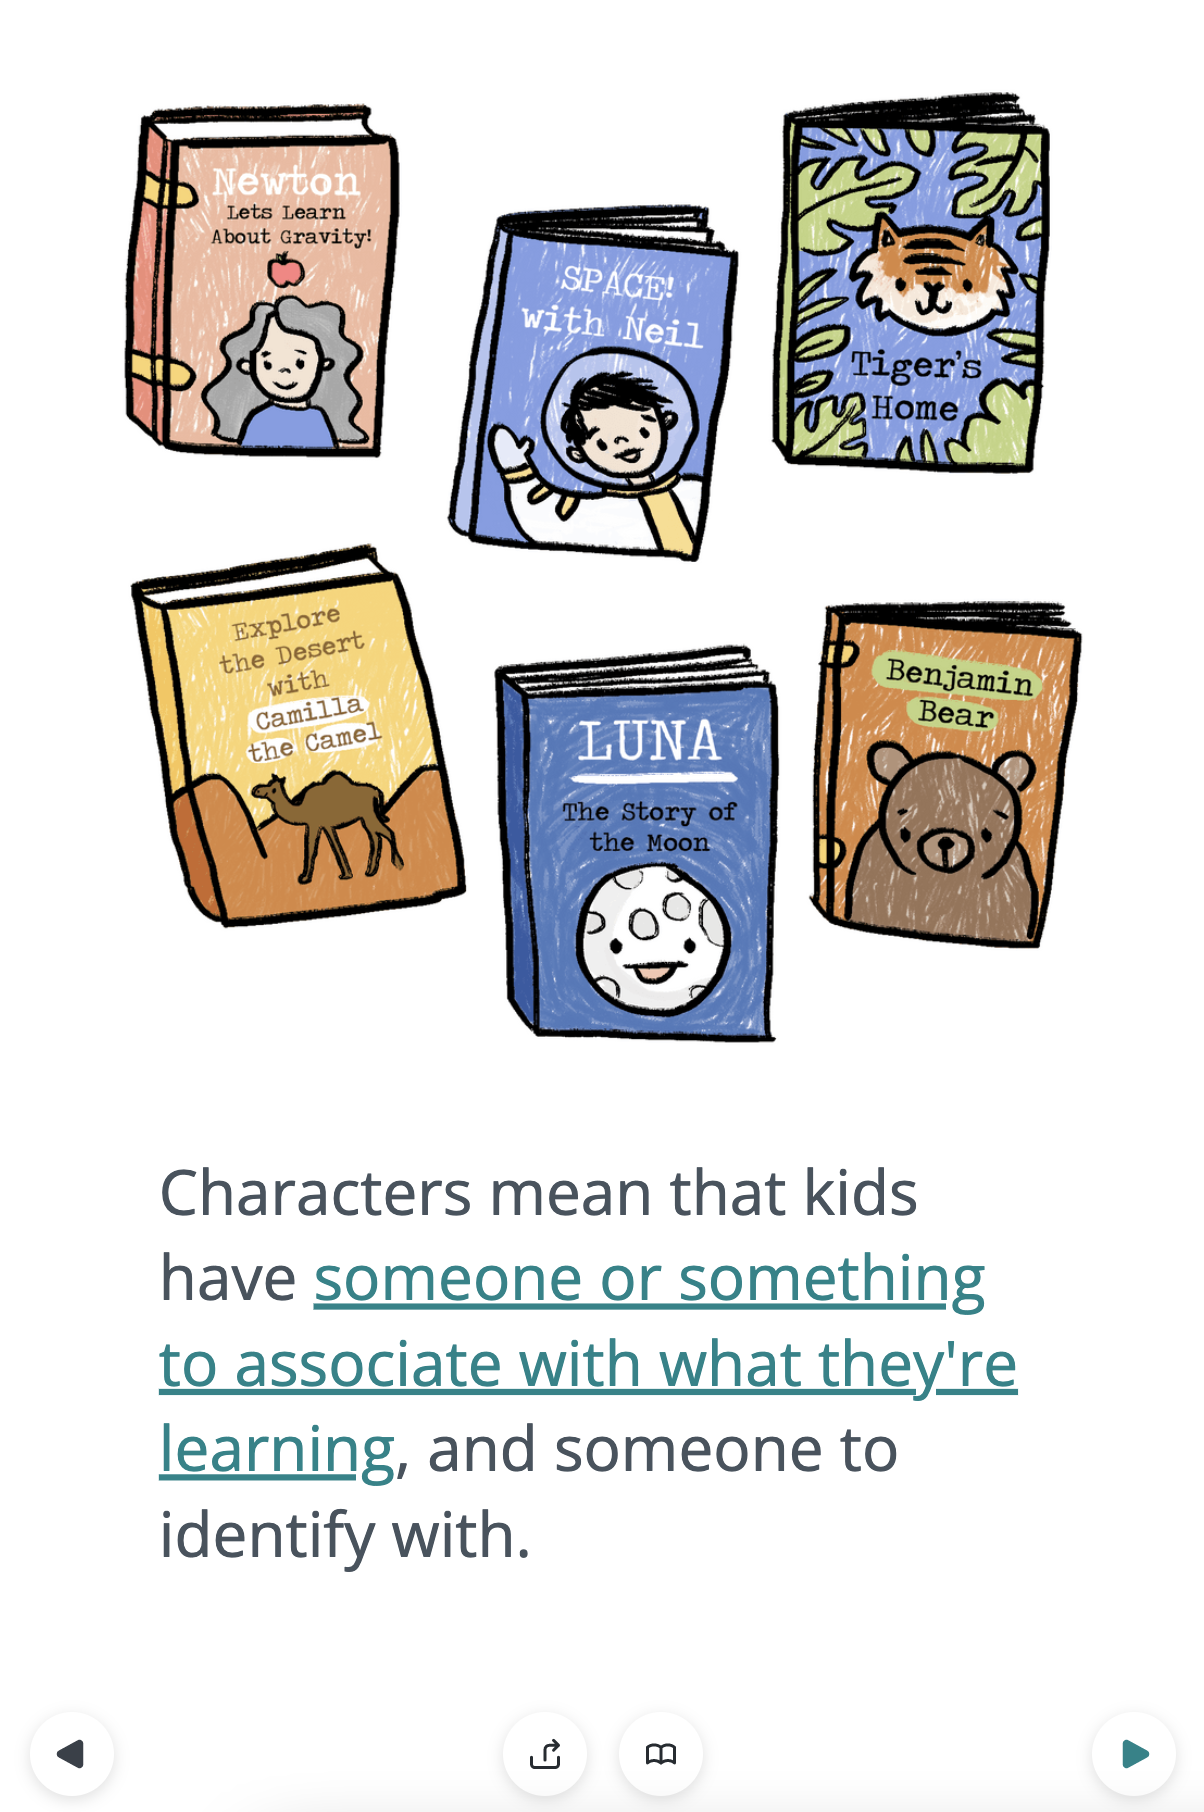 Screenshot from "How to Write about Science for Kids" - drawing of six children's books